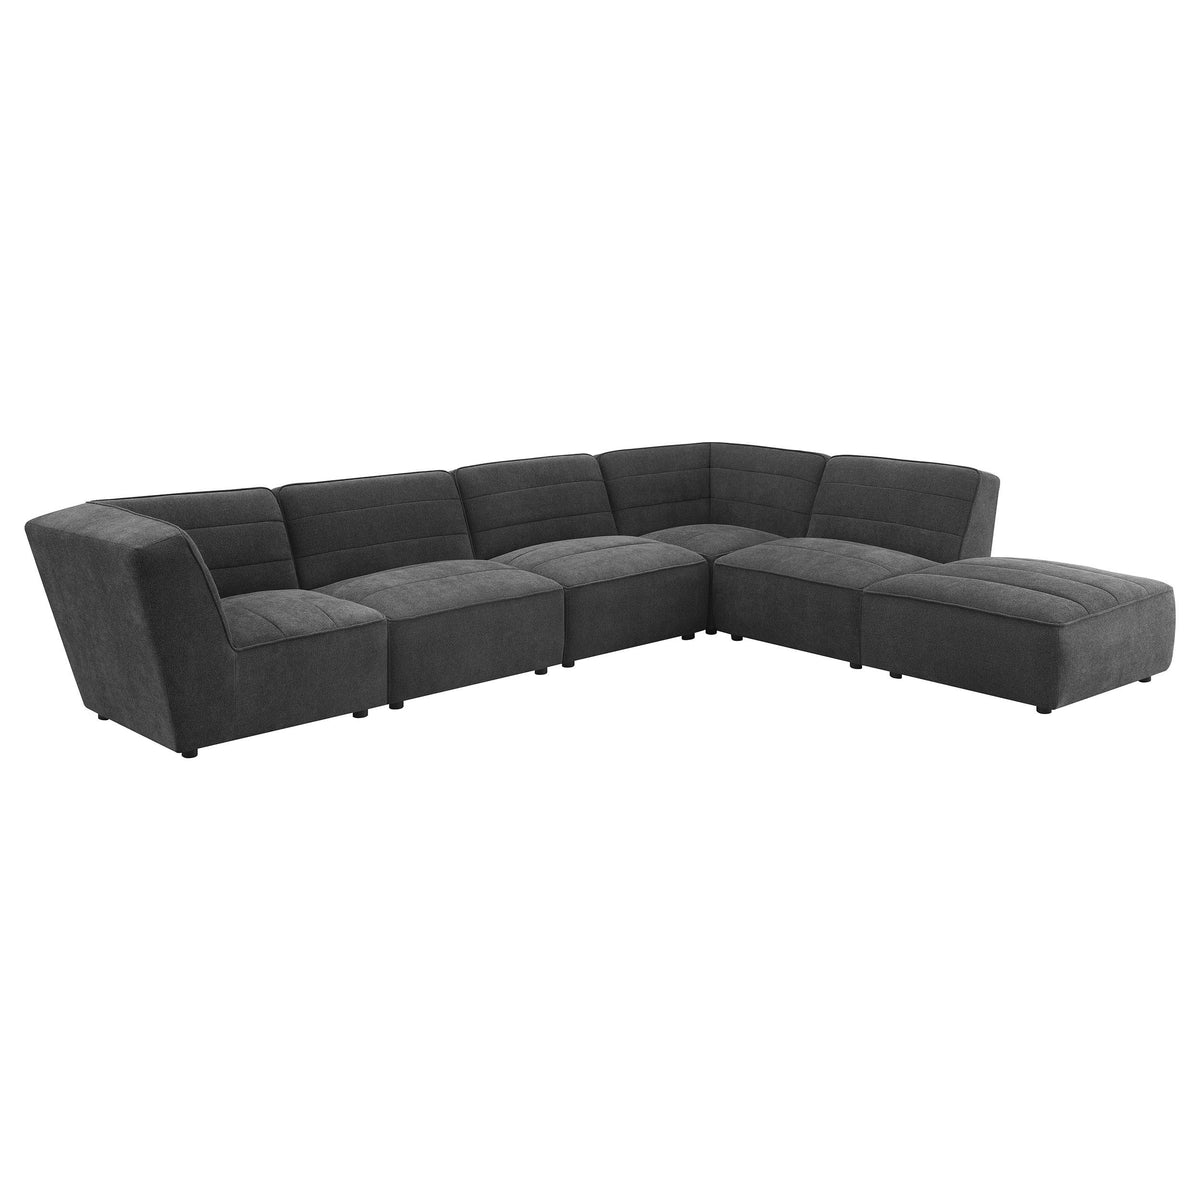 Sunny Upholstered 6-piece Modular Sectional Dark Charcoal - Half Price Furniture